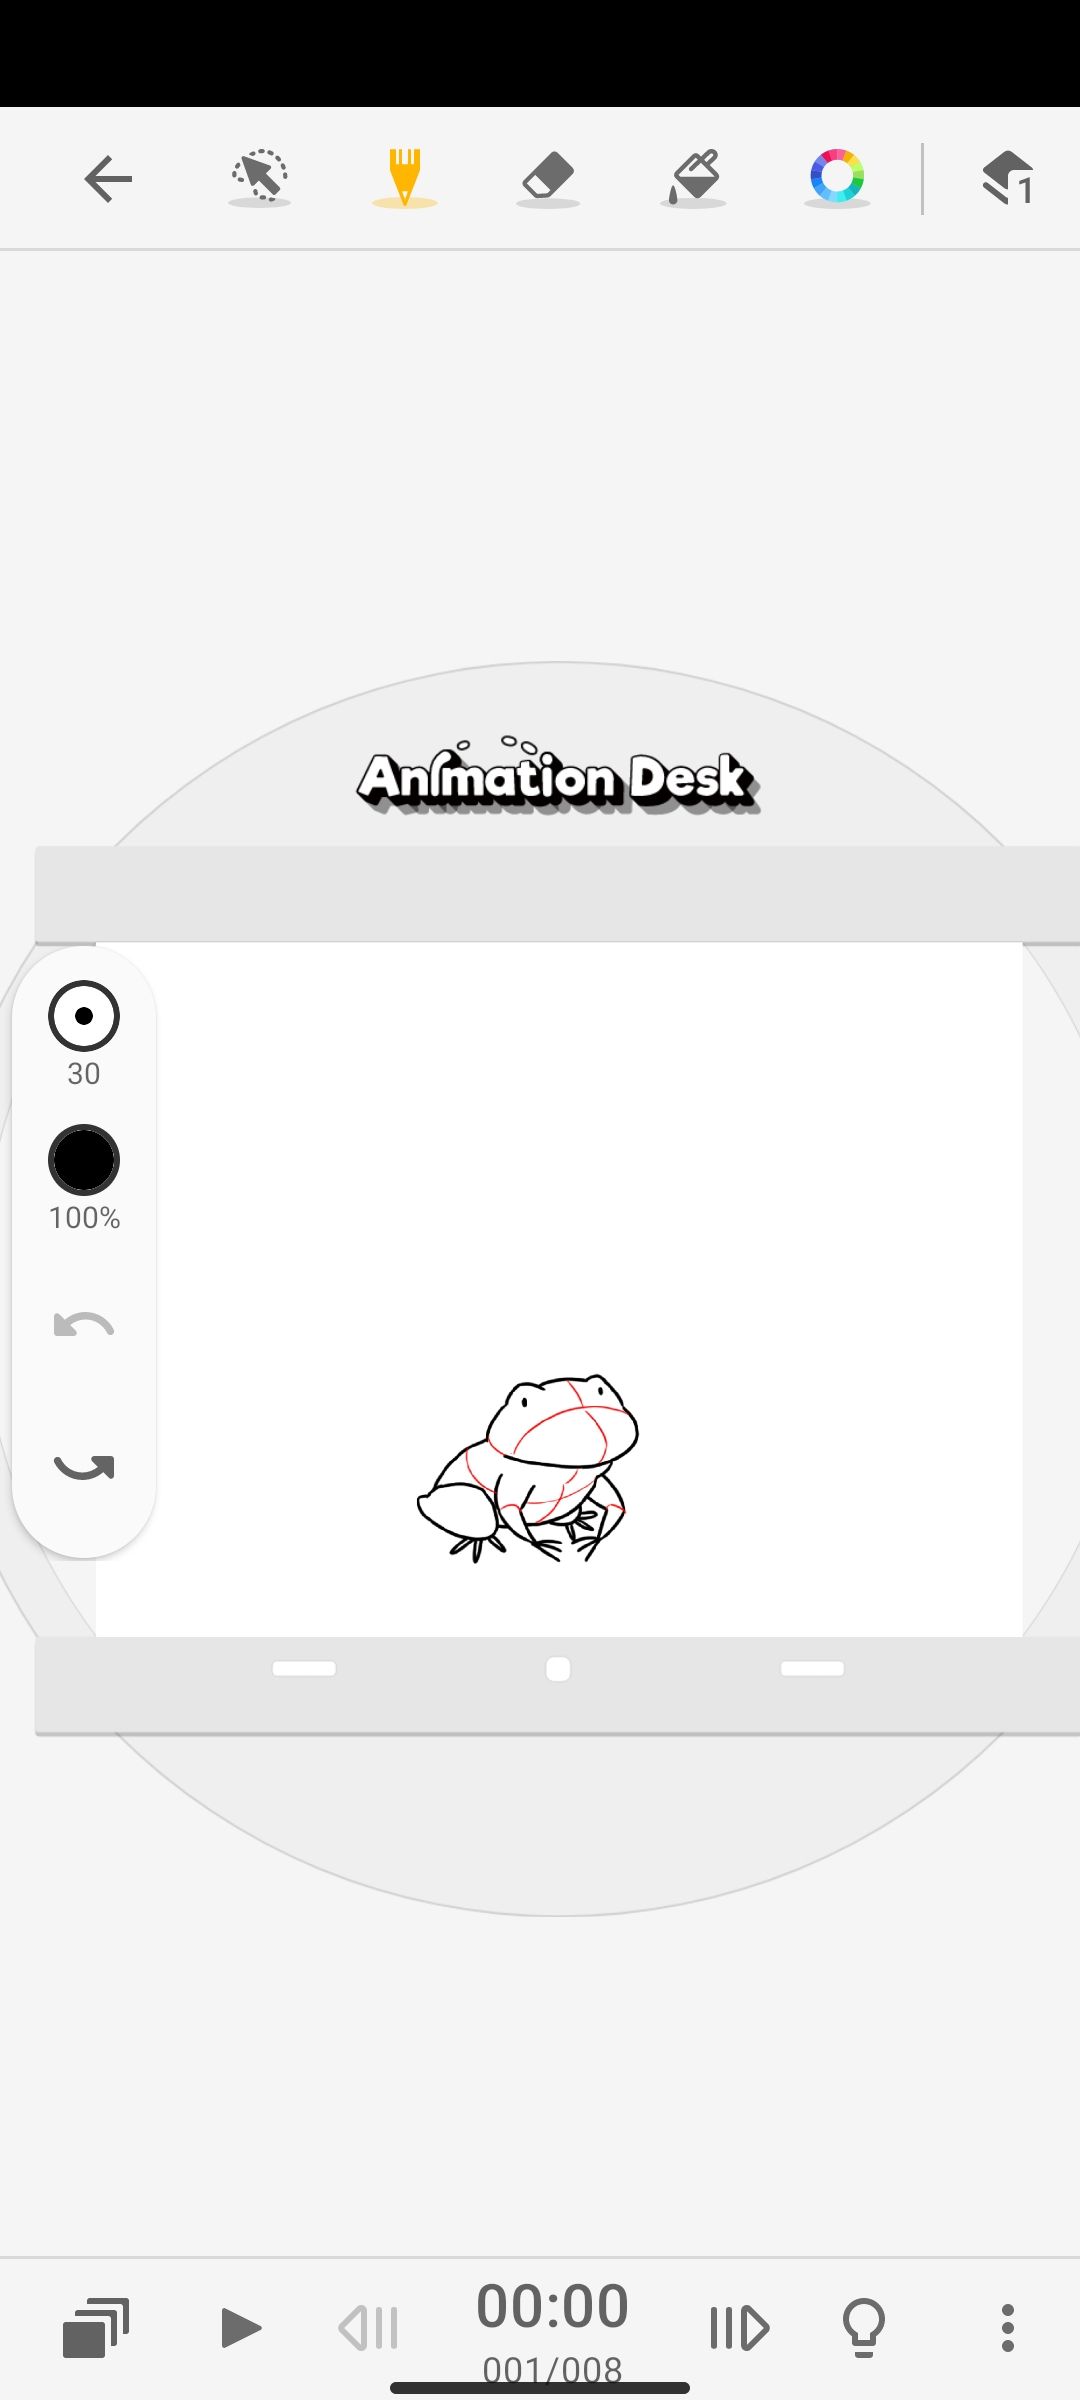 Animation Desk canvas with the drawing of a frog